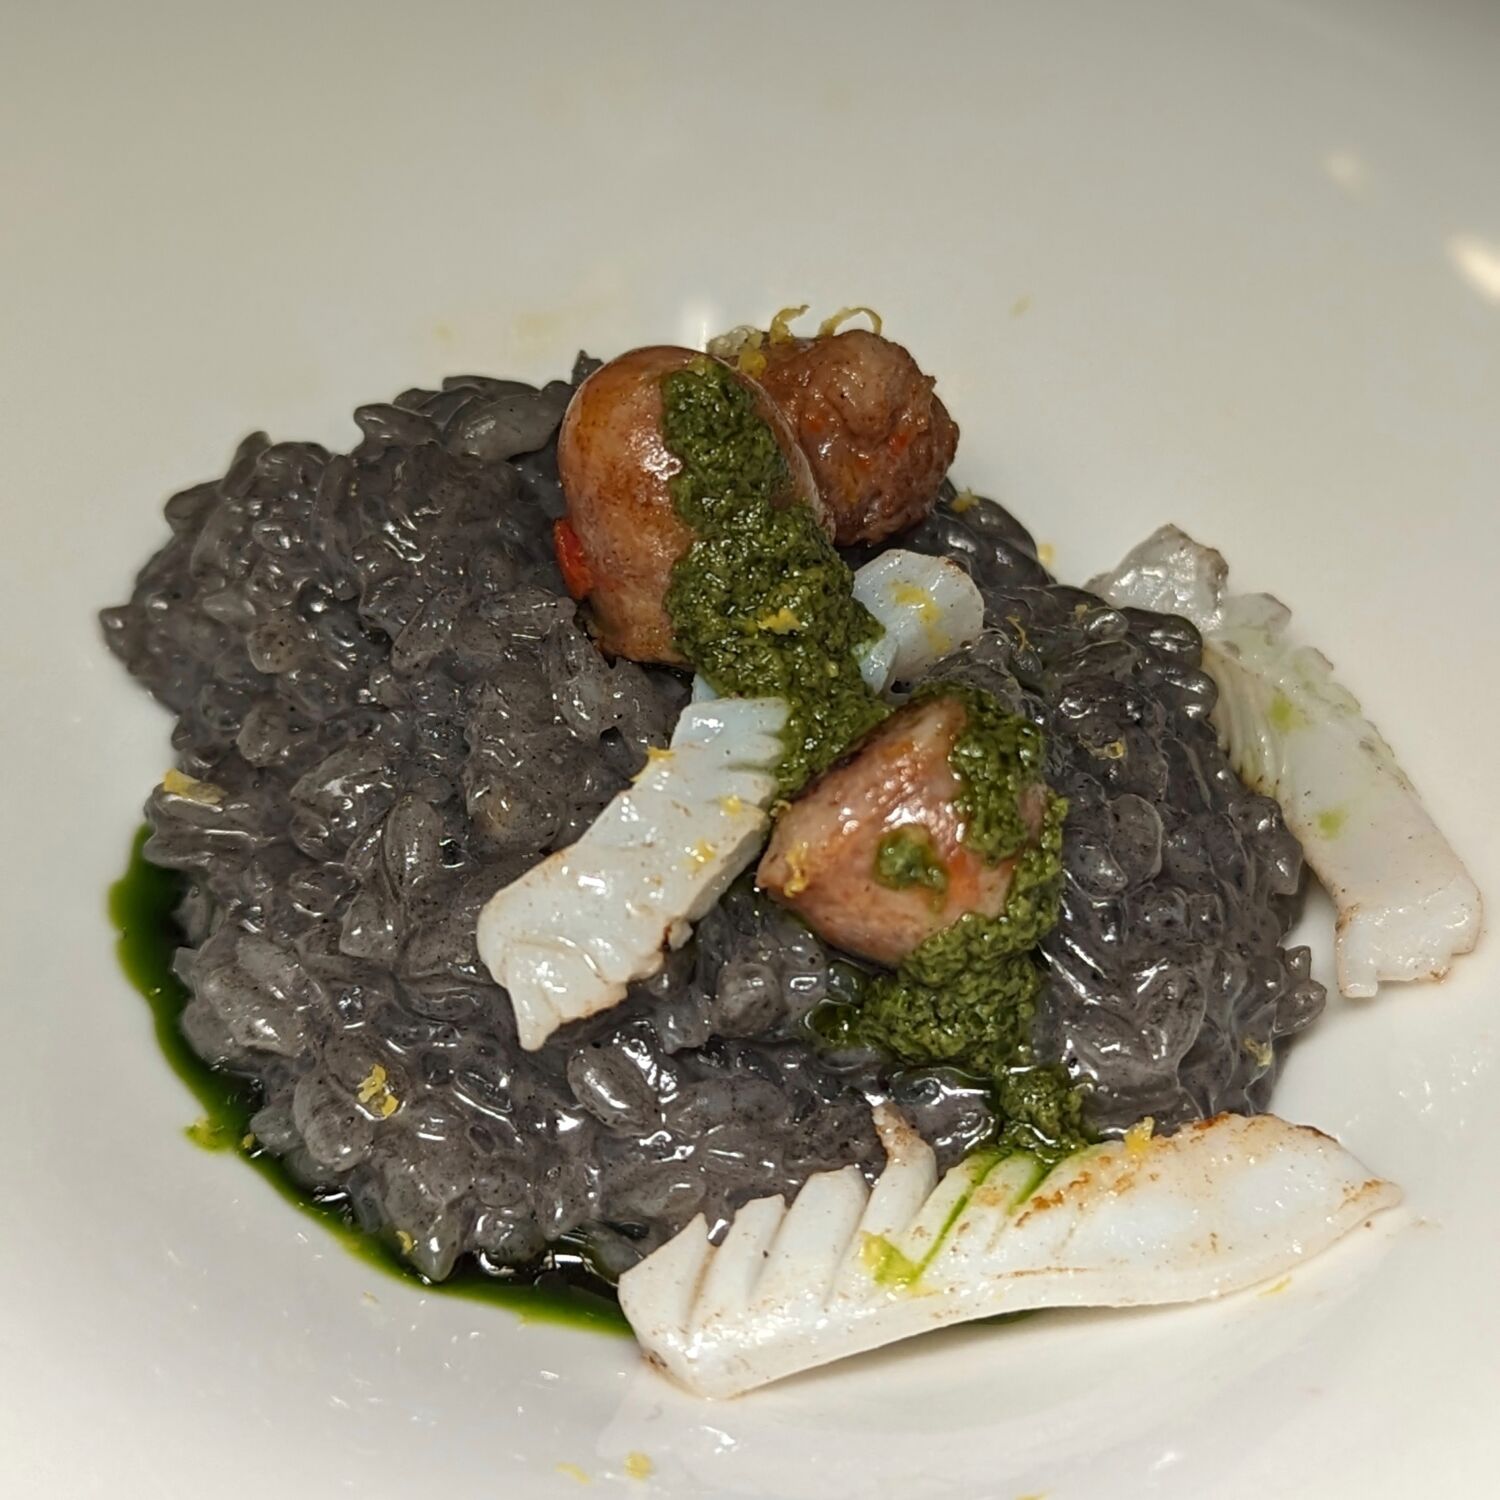 Four Seasons Hotel Kyoto Brasserie Squid Ink Risotto